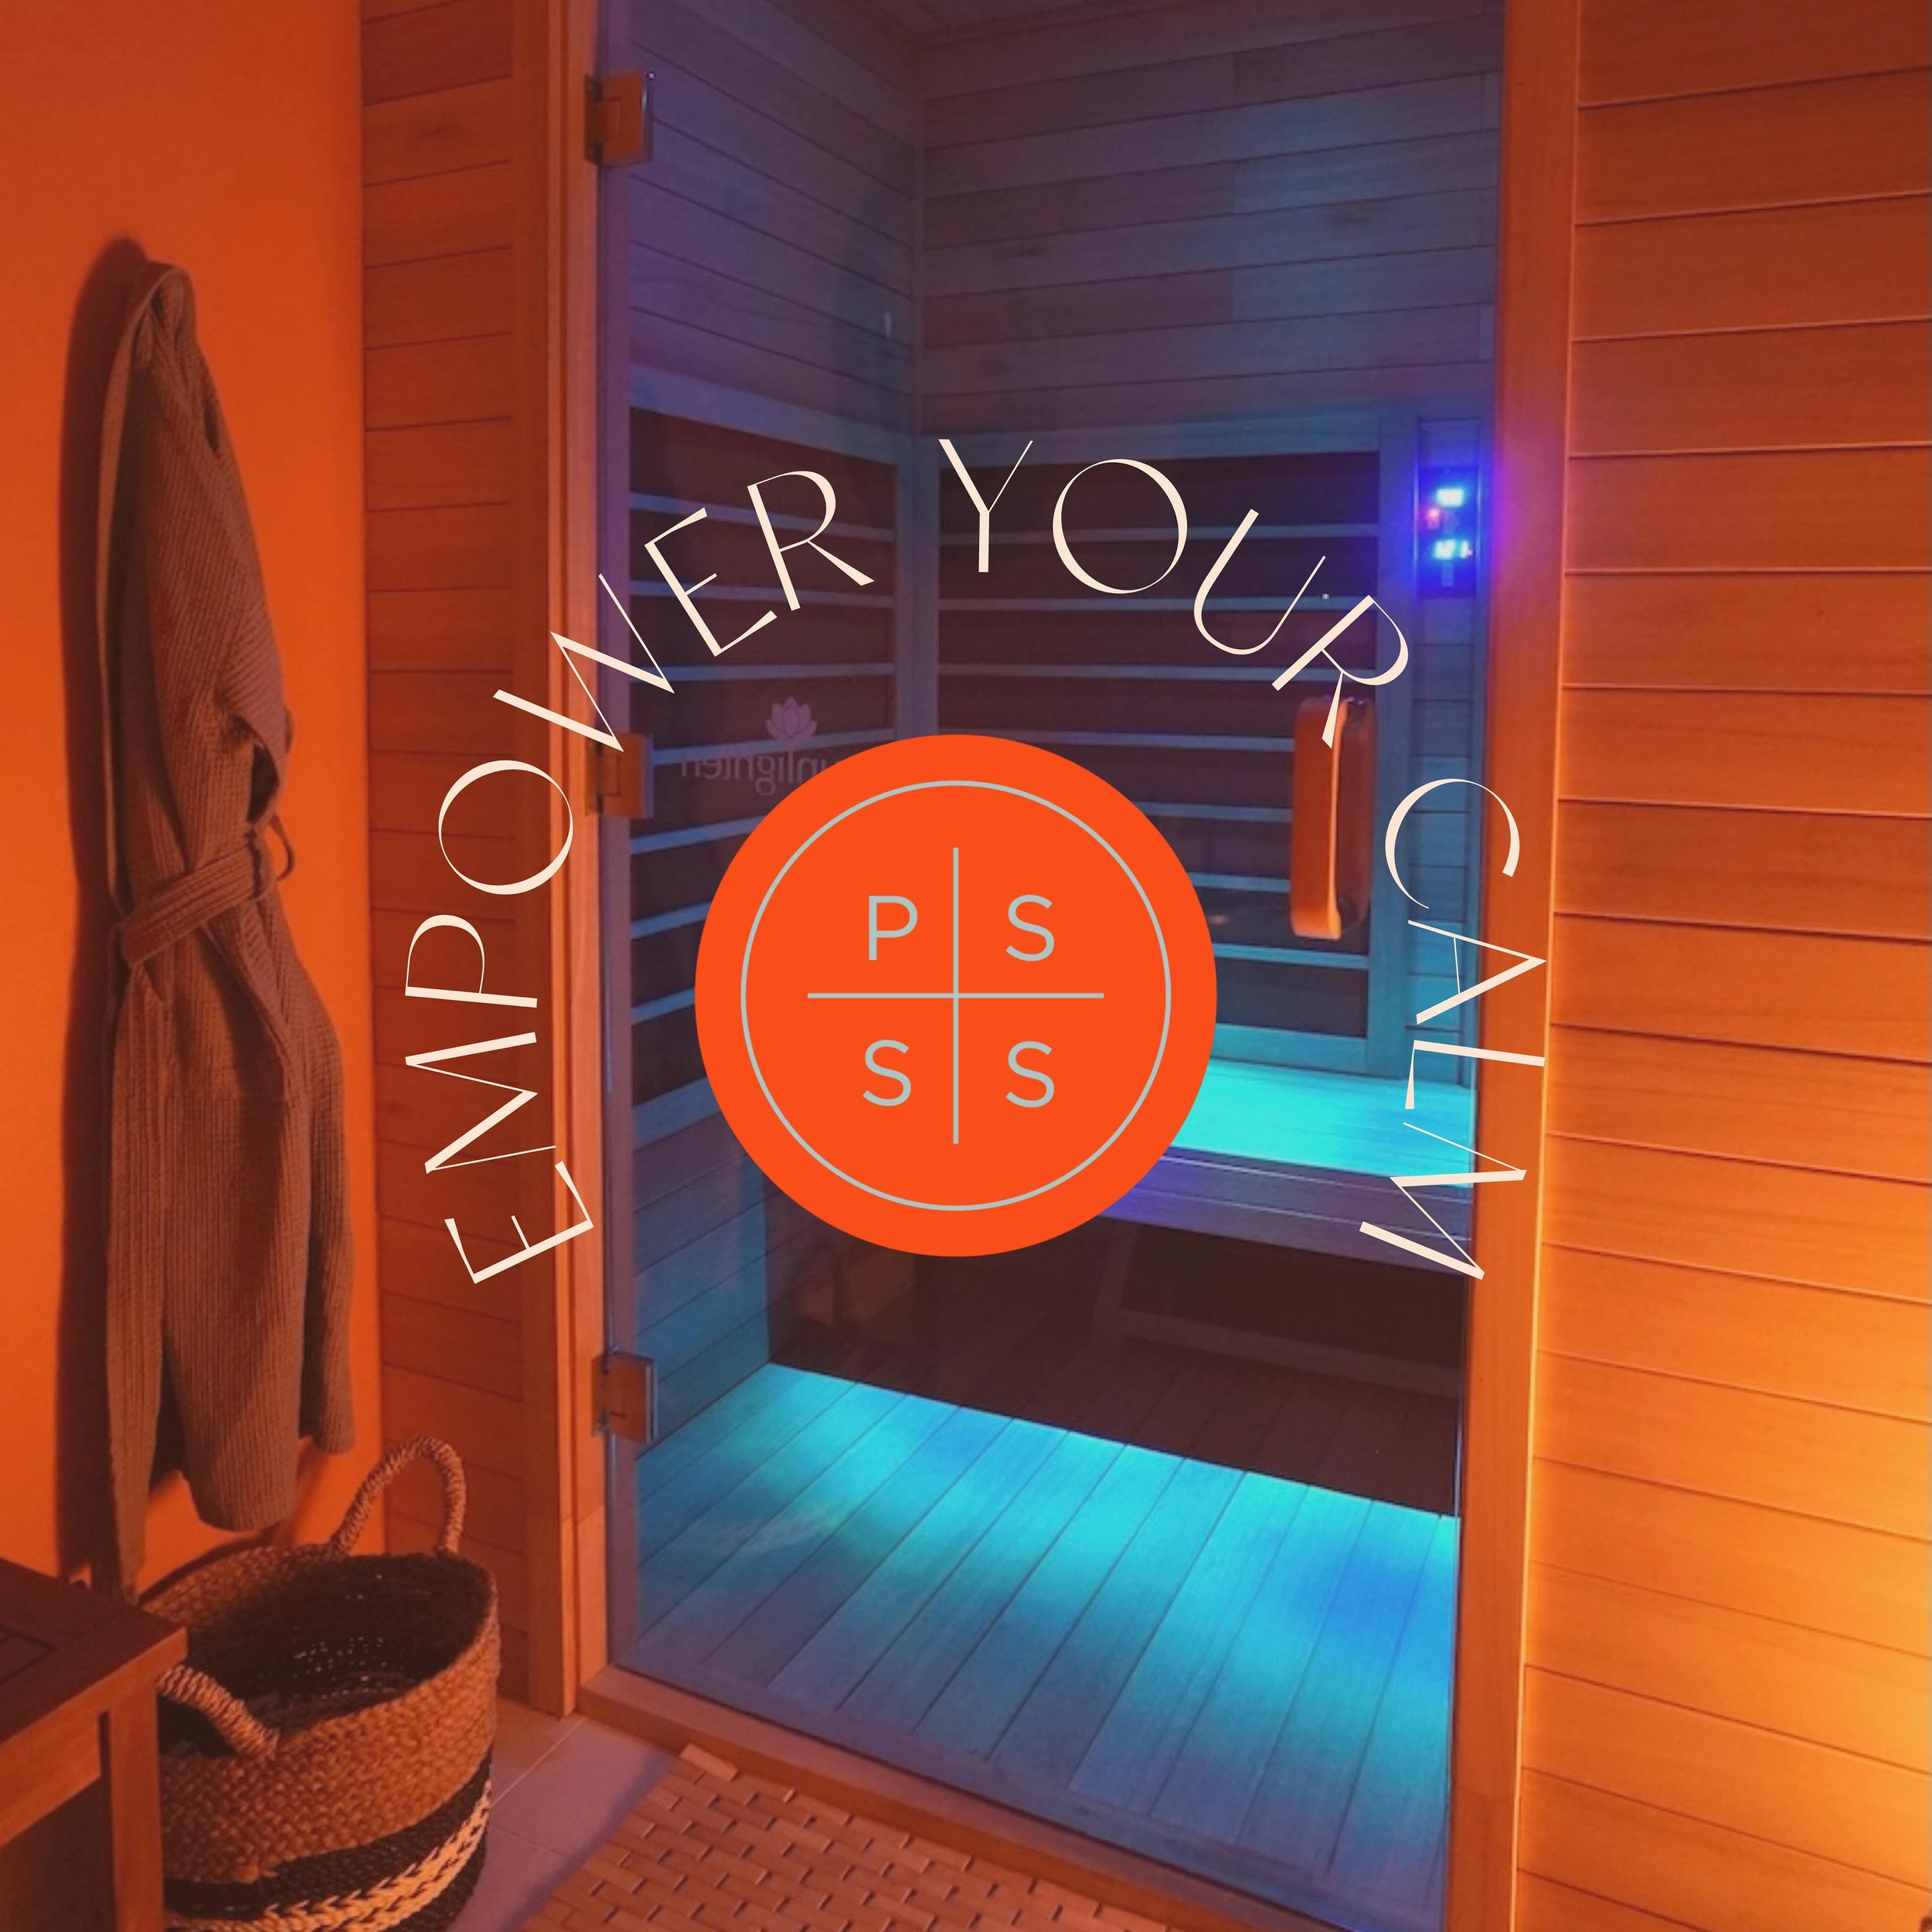 Before summer is officially here with the excitement of travels, adventures, holidays, + chaos to come, we invite you to a practice of calm 💫

Invigorate your health + discover the calming power of Infrared Sauna today with our limited time buy one 